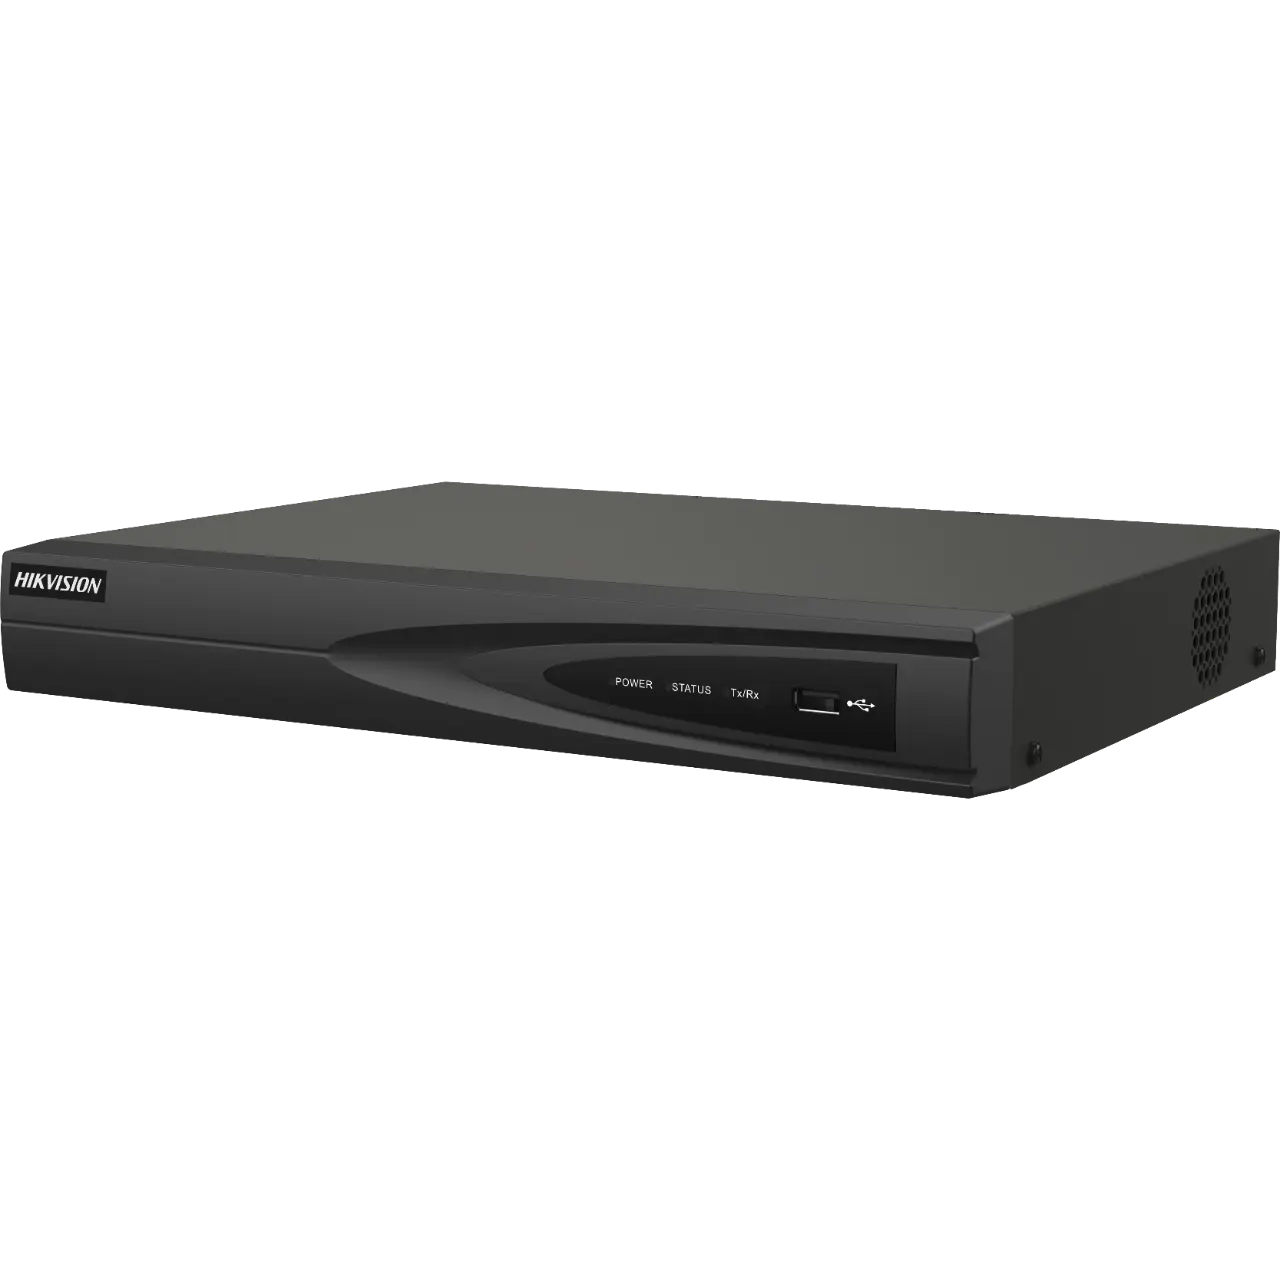 Hikvision DS-7604NI-K1 NVR Network Video Recorder, H.265+/H.265/H.264+/H.264 Video Formats, 4-ch IP Camera Inputs, 40 Mbps Bandwidth, Affordable Price